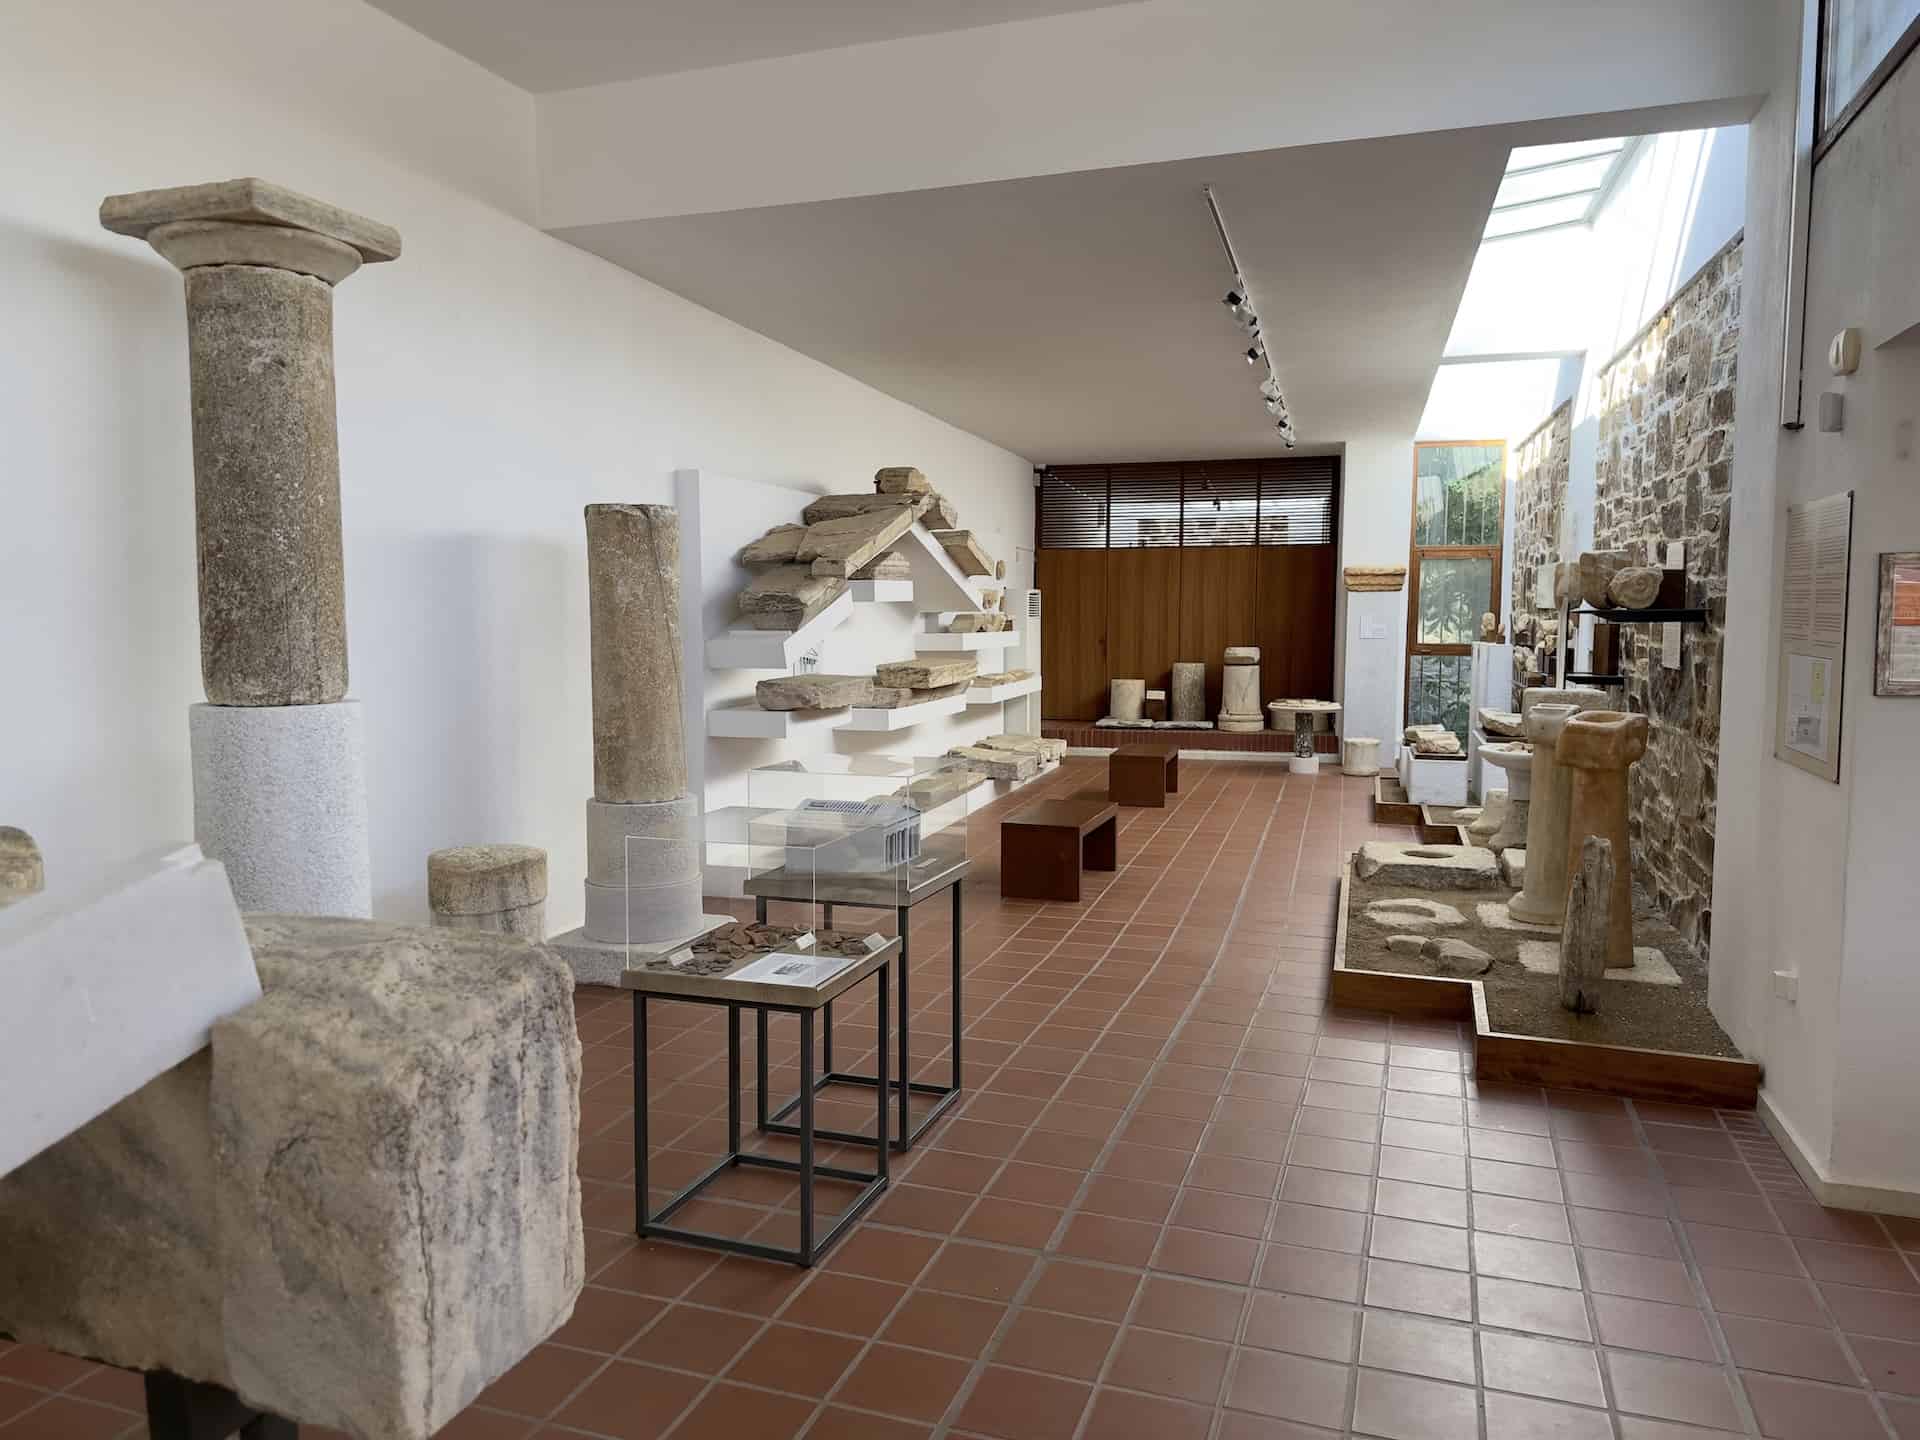 Museum at the Temple of Demeter in Naxos, Greece